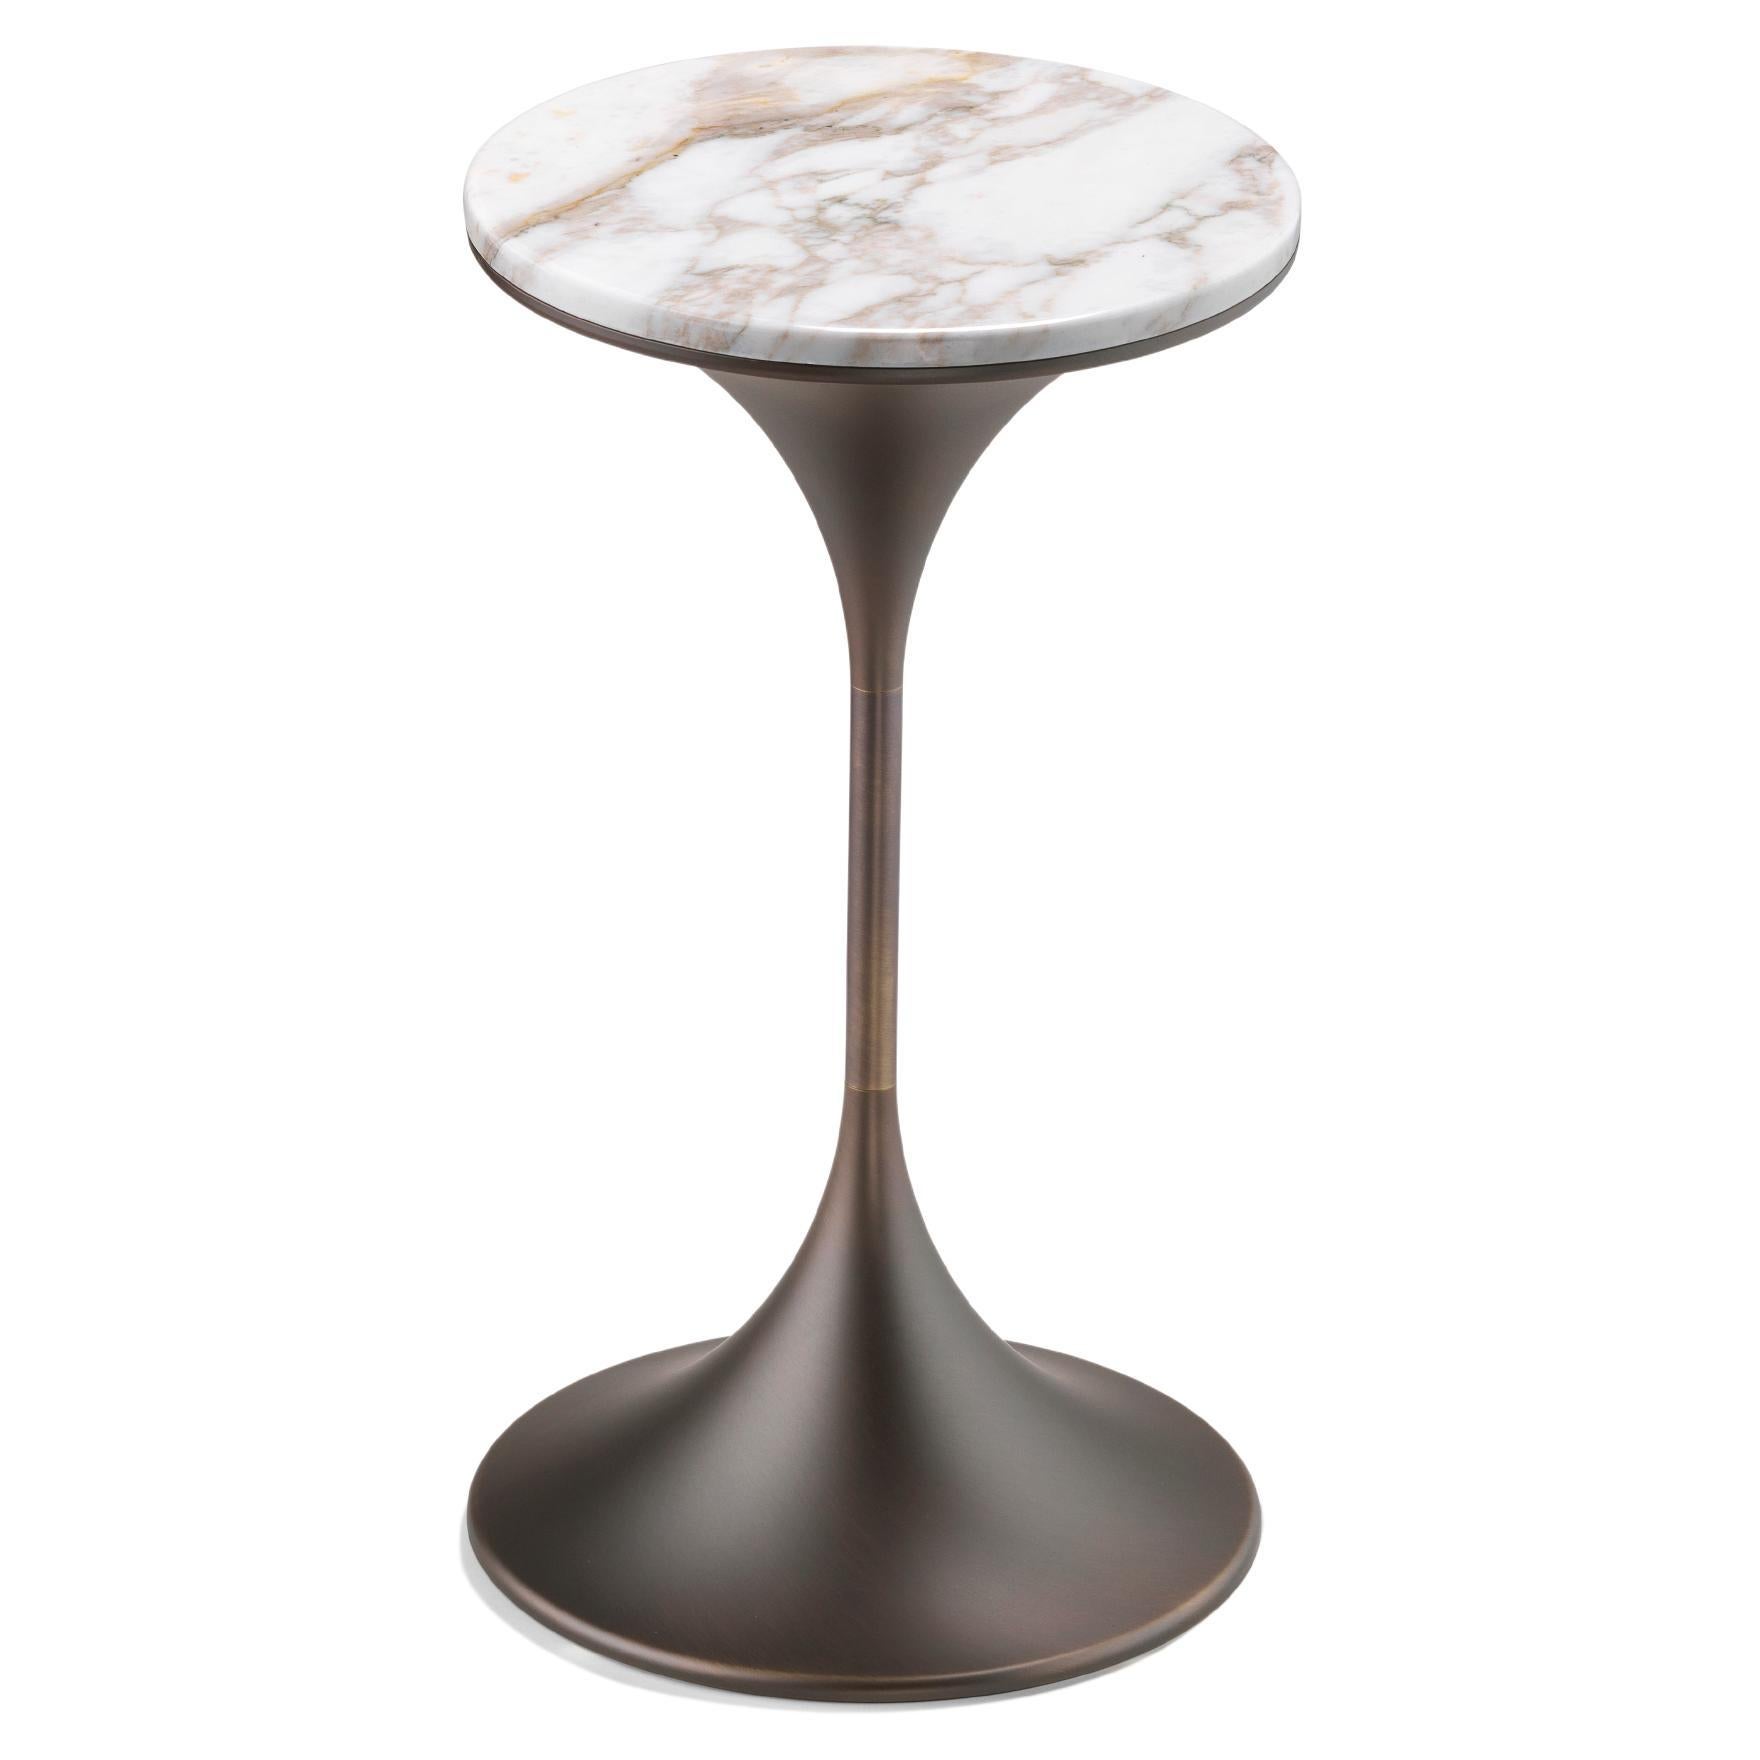 Dapertutto Tall Table, Calacatta Gold Top, Burnished Brass , Made in Italy